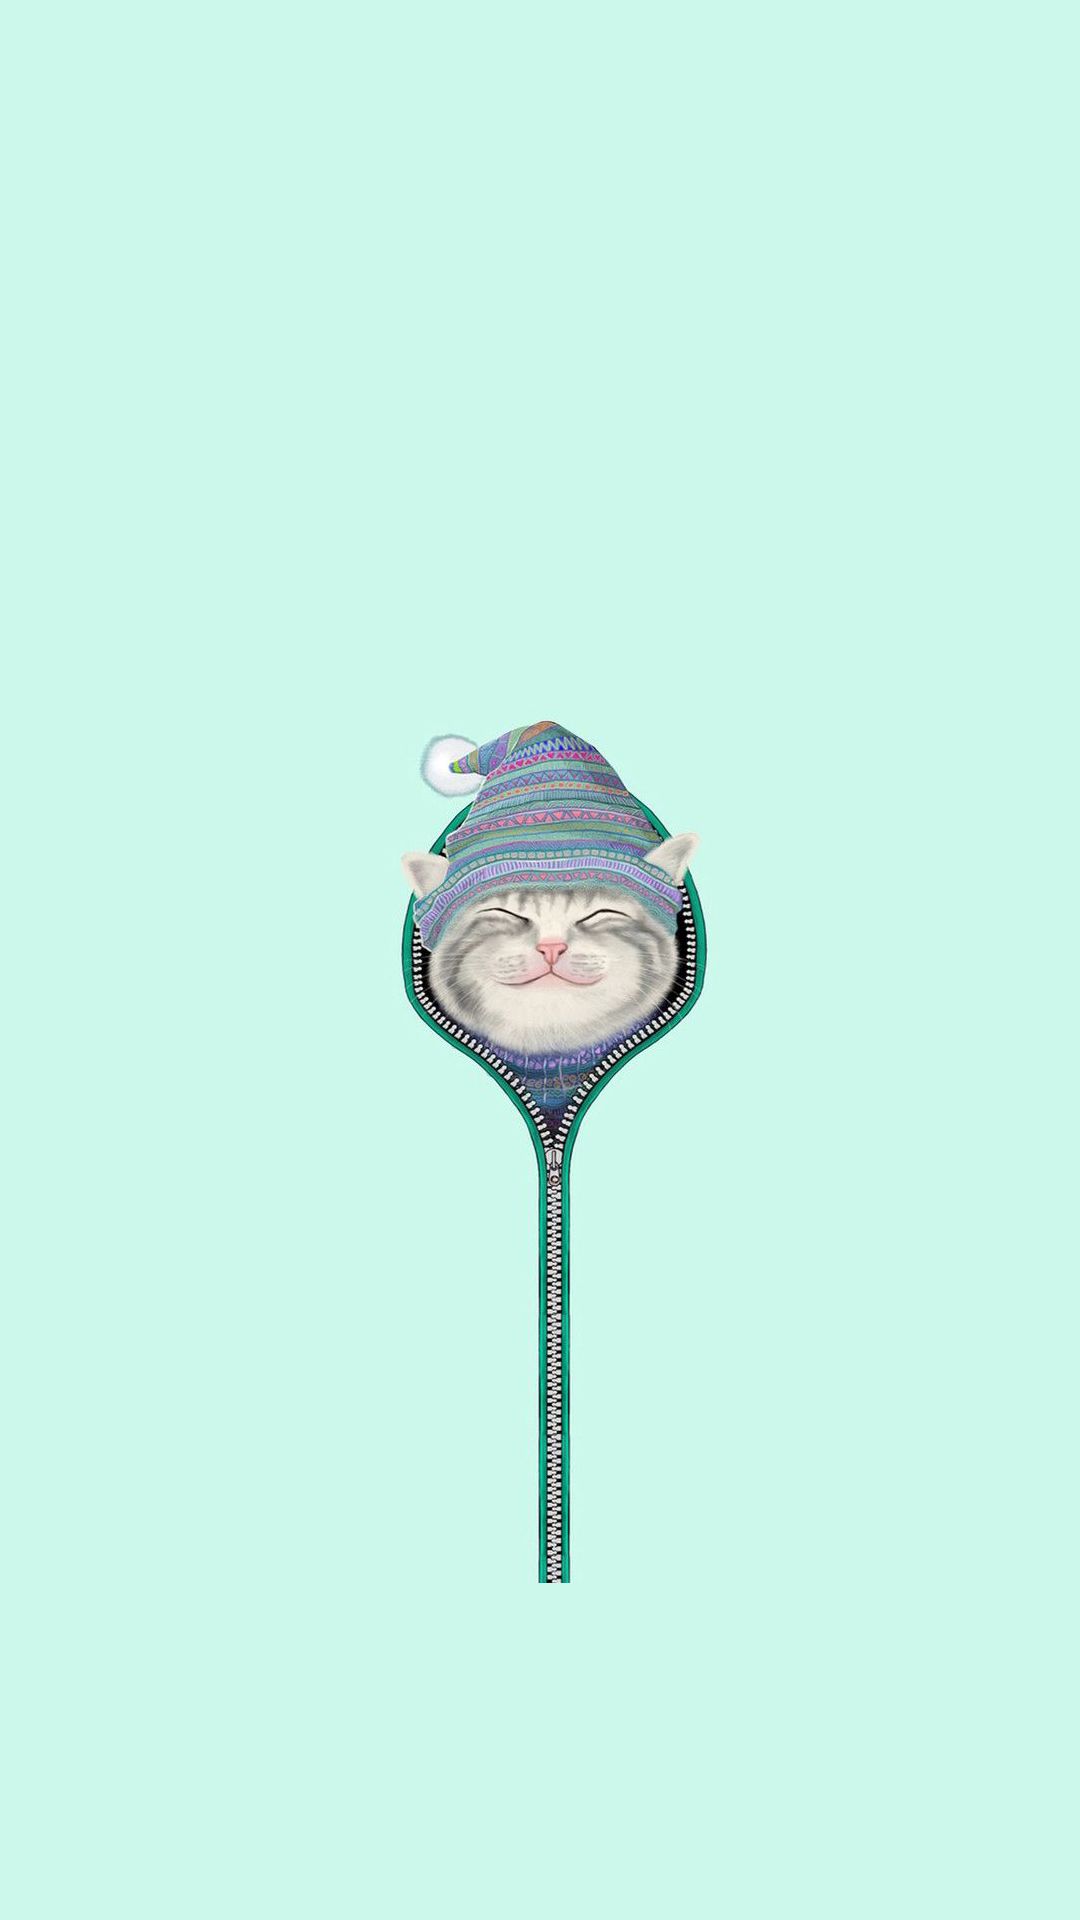 Cute Smiling Cat Zipper Hat Android Wallpaper free download